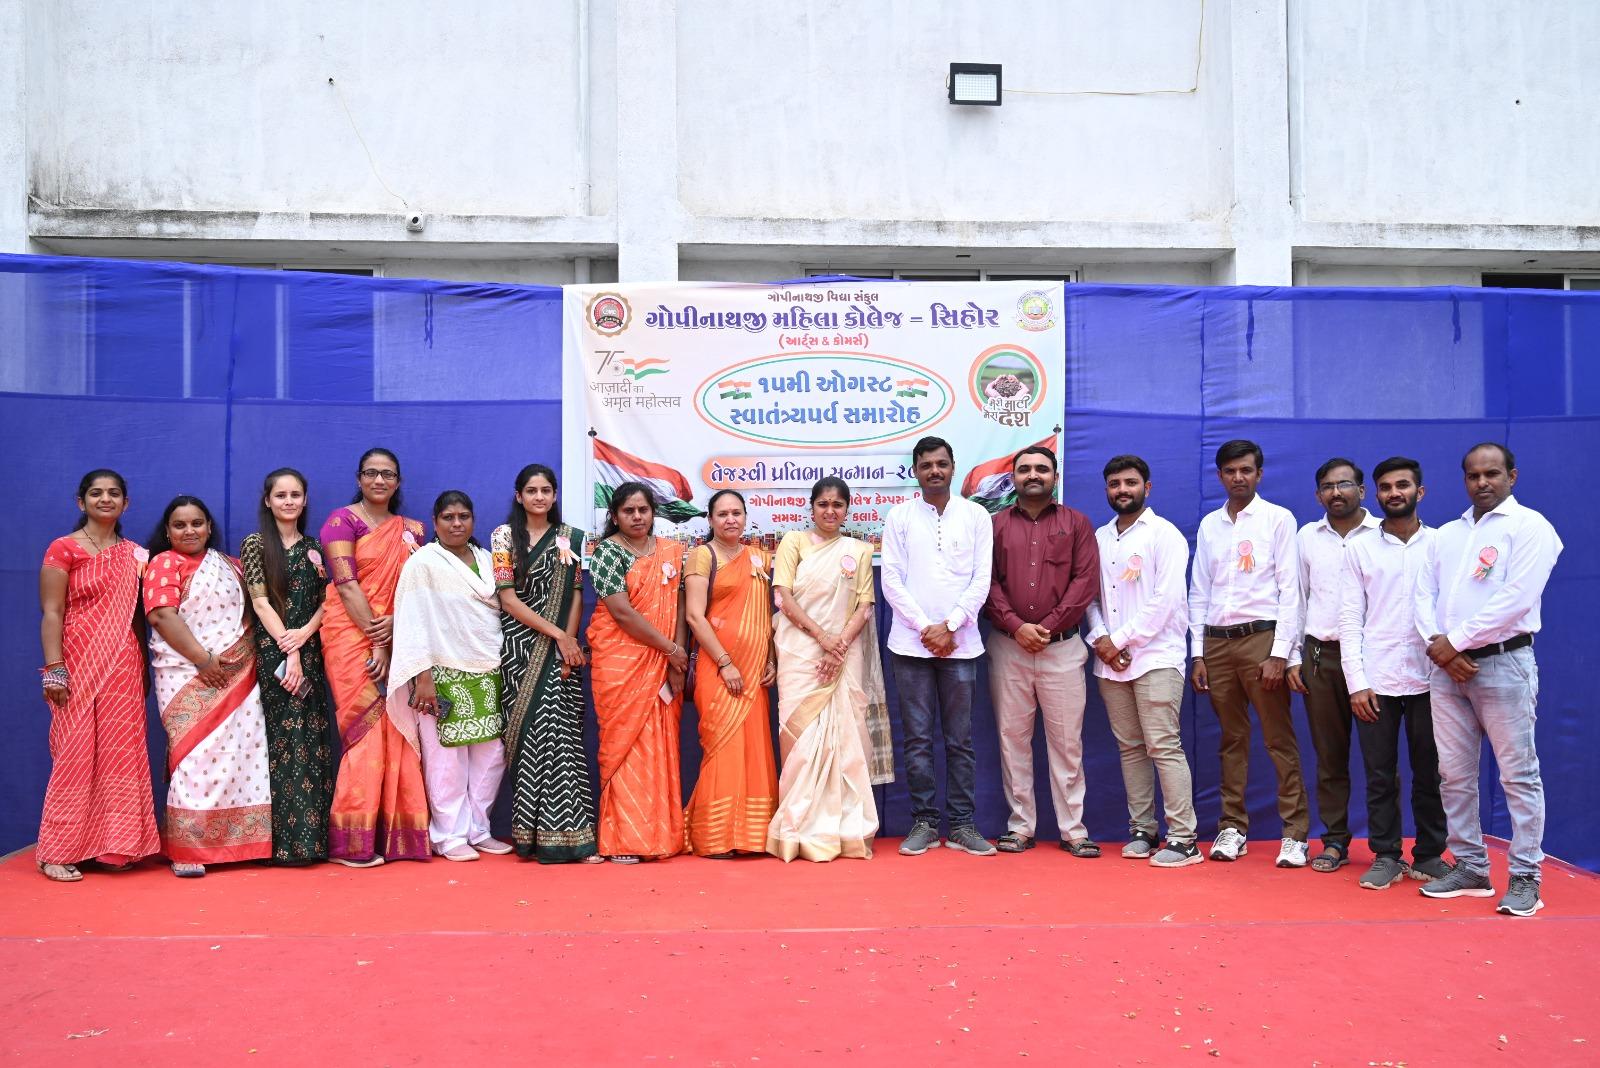 The National Day was celebrated with Aan Ban Shan at Sihore Gopinathji Women's College